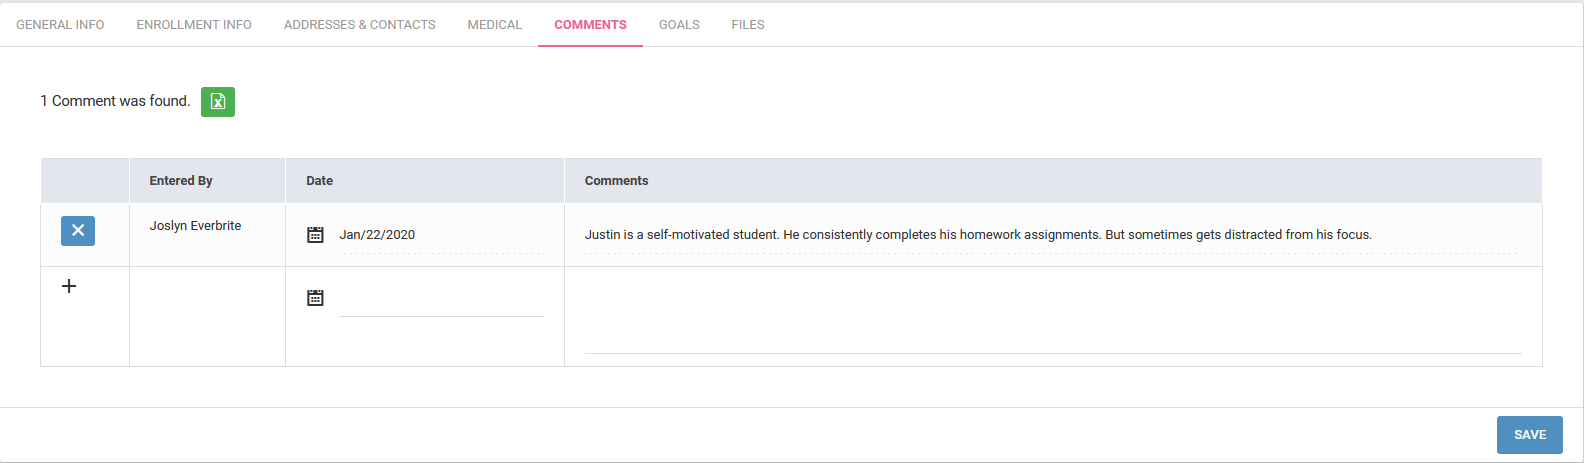 Student_comments_info.png